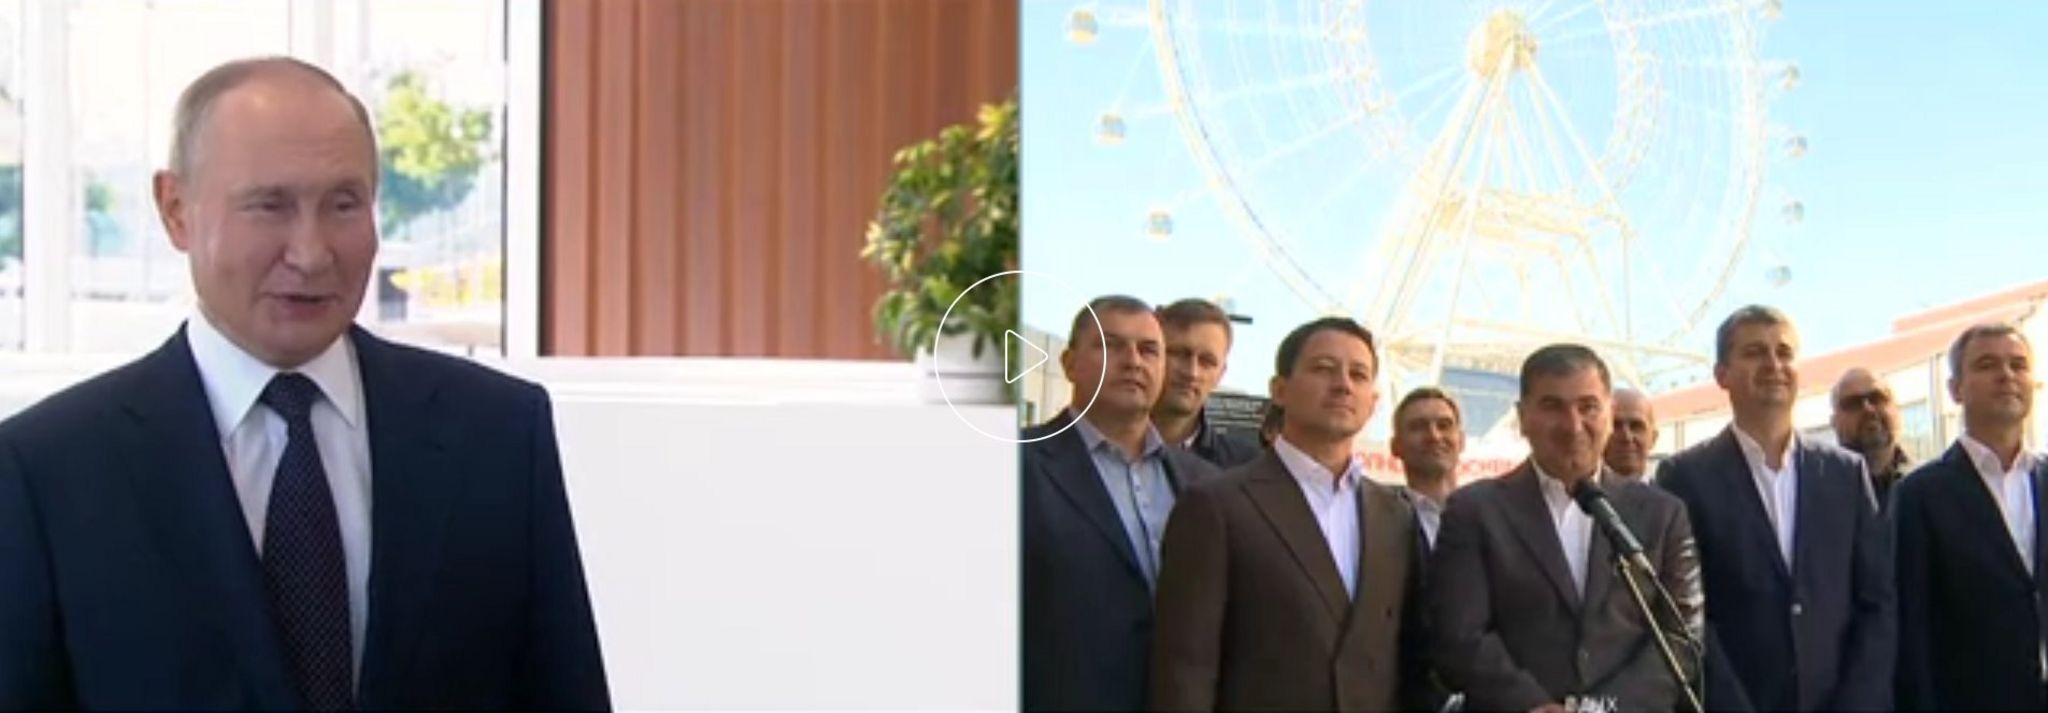 A screengrab from a video of Putin opening the Ferris wheel